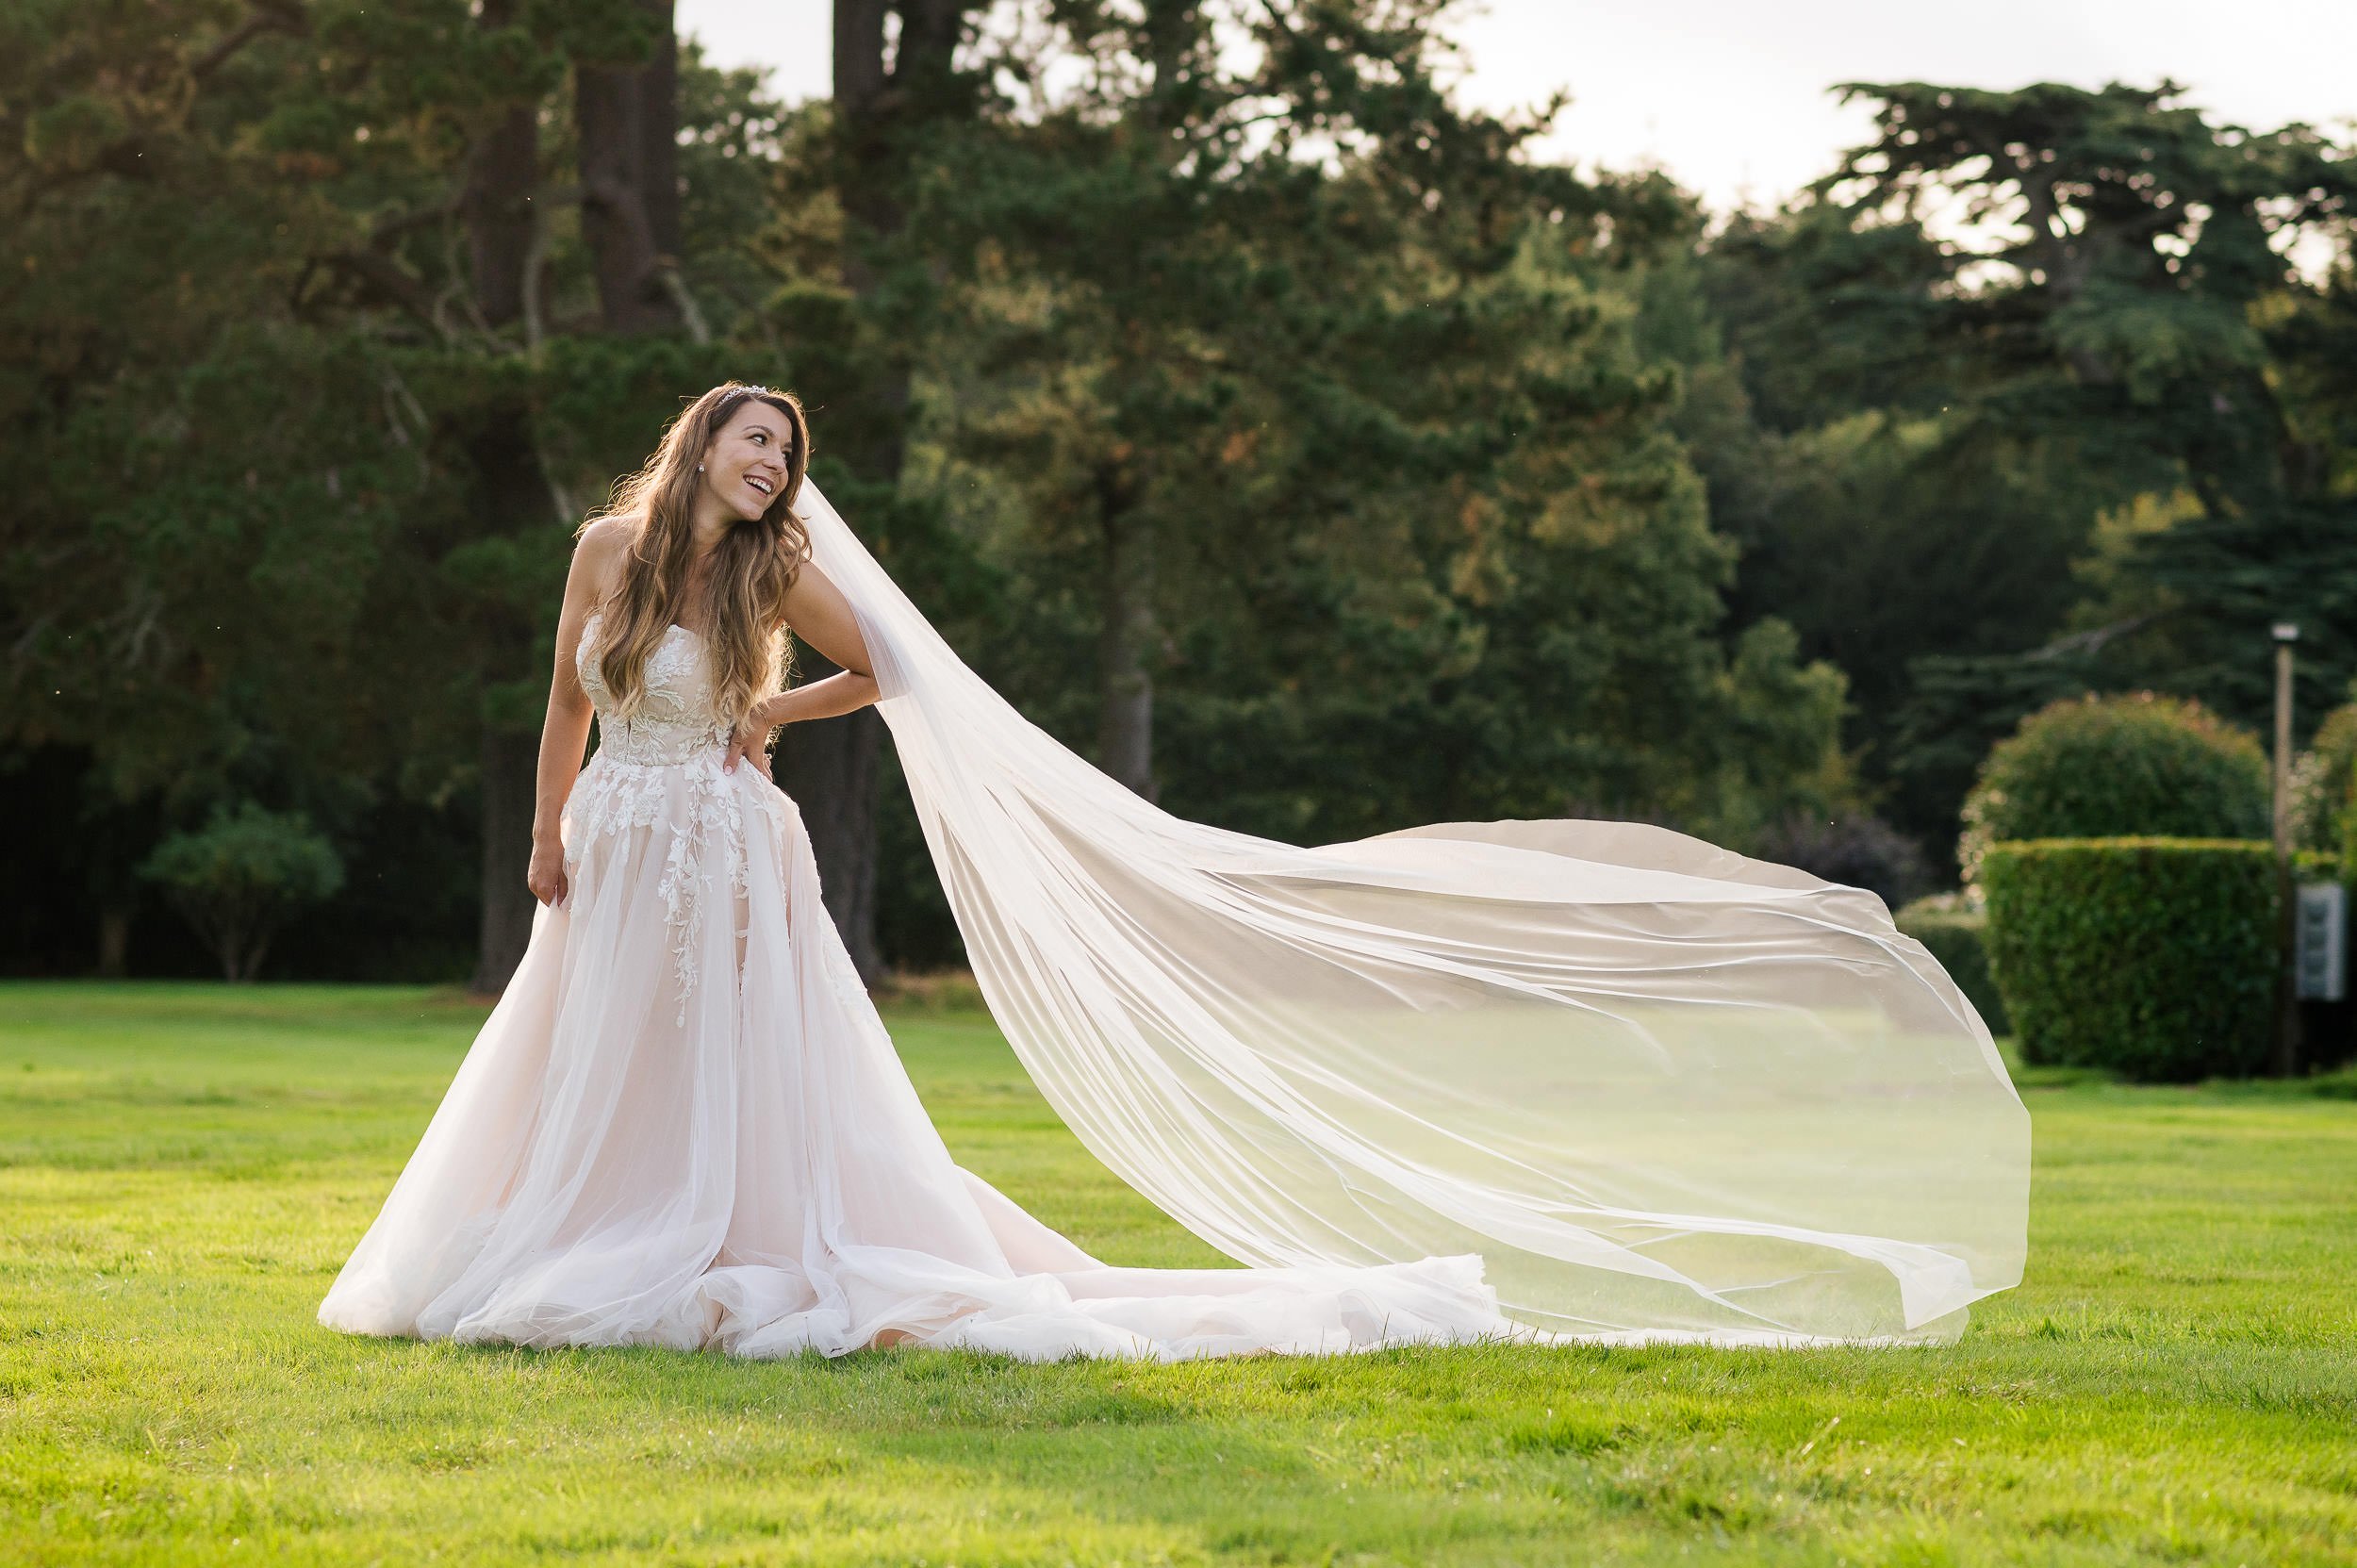 Bride in the garden at Hethfelton House wedding as her veil catches the wind